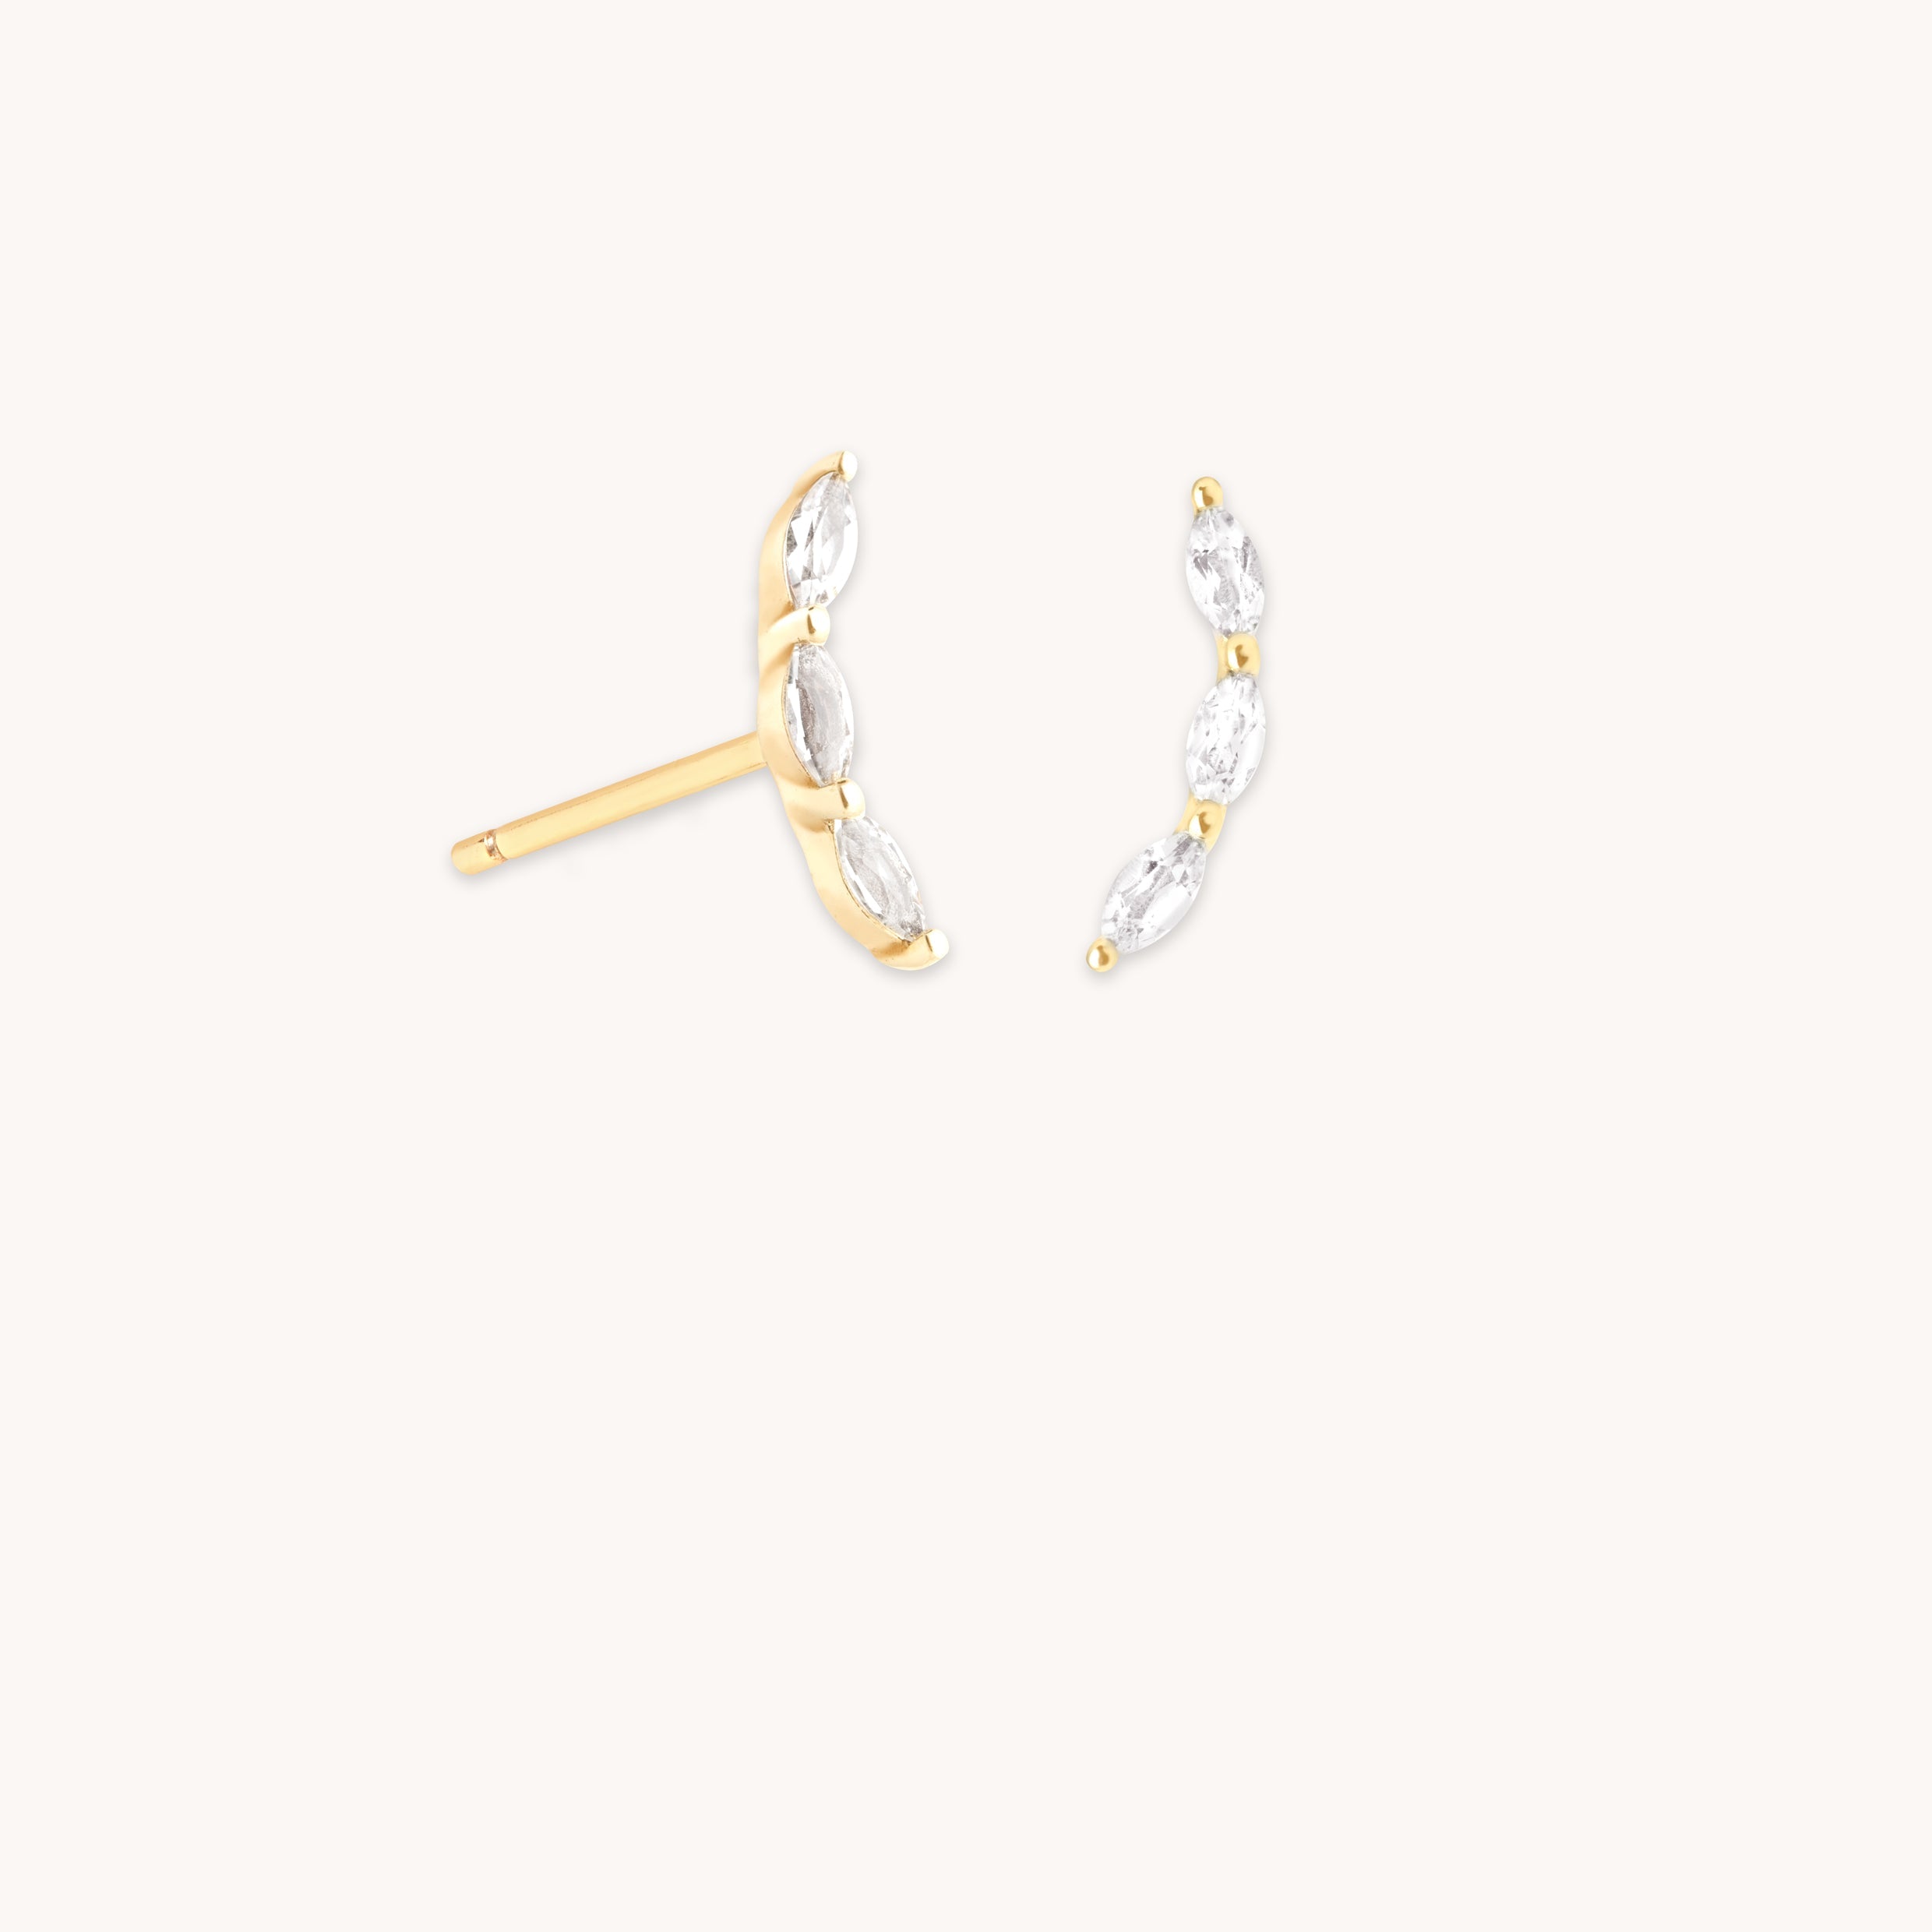 White Topaz Curved Studs in Solid Gold